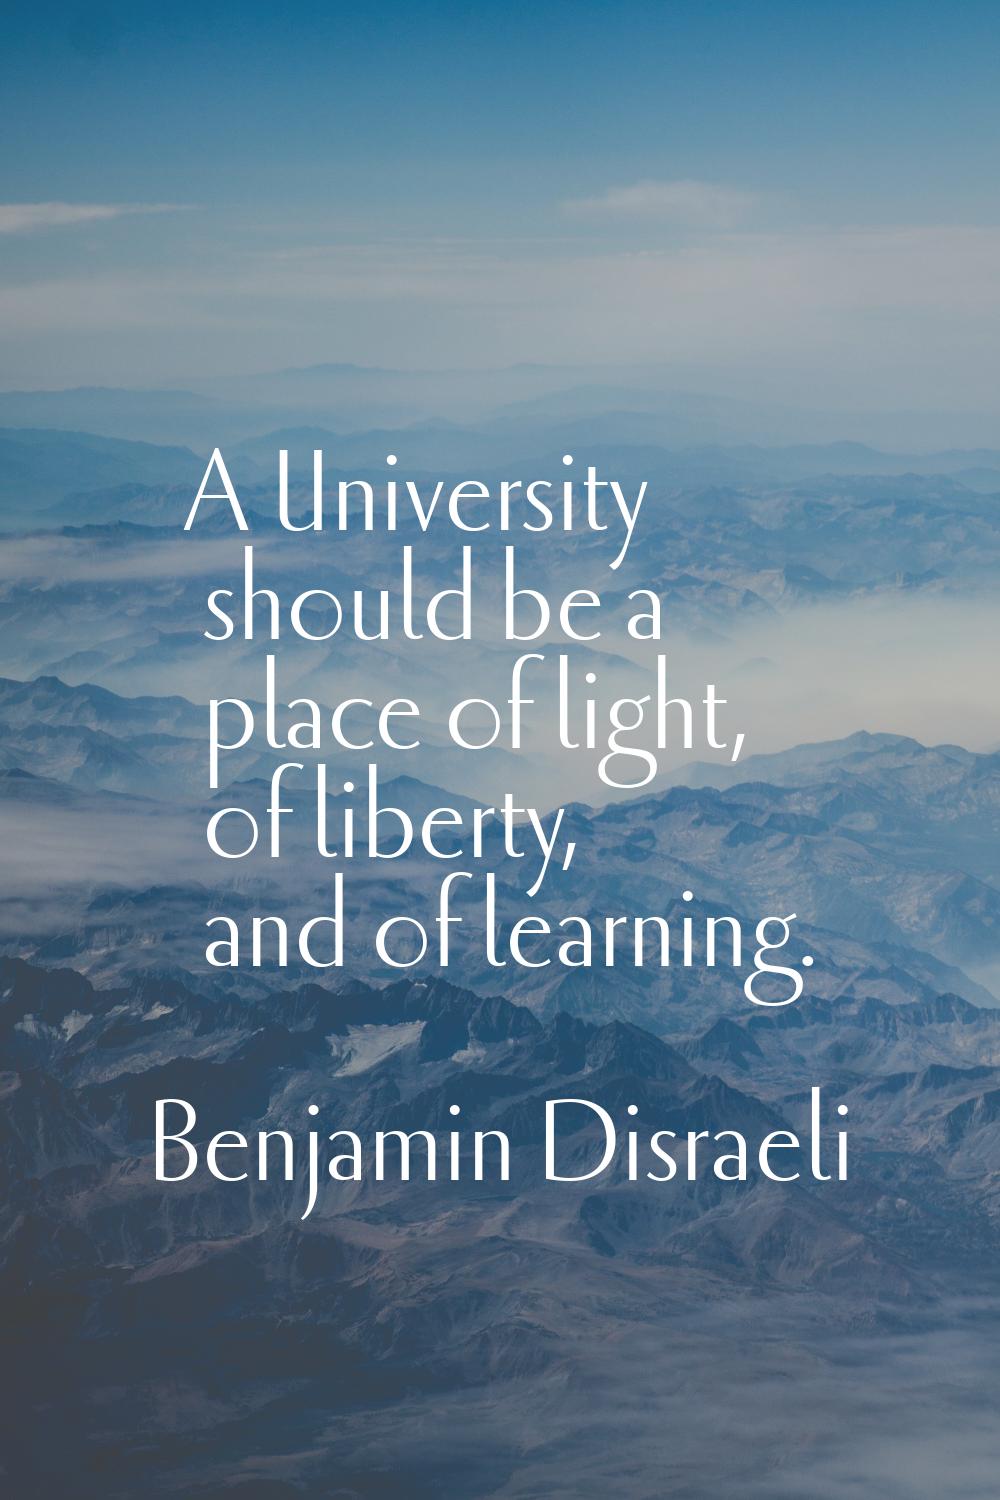 A University should be a place of light, of liberty, and of learning.